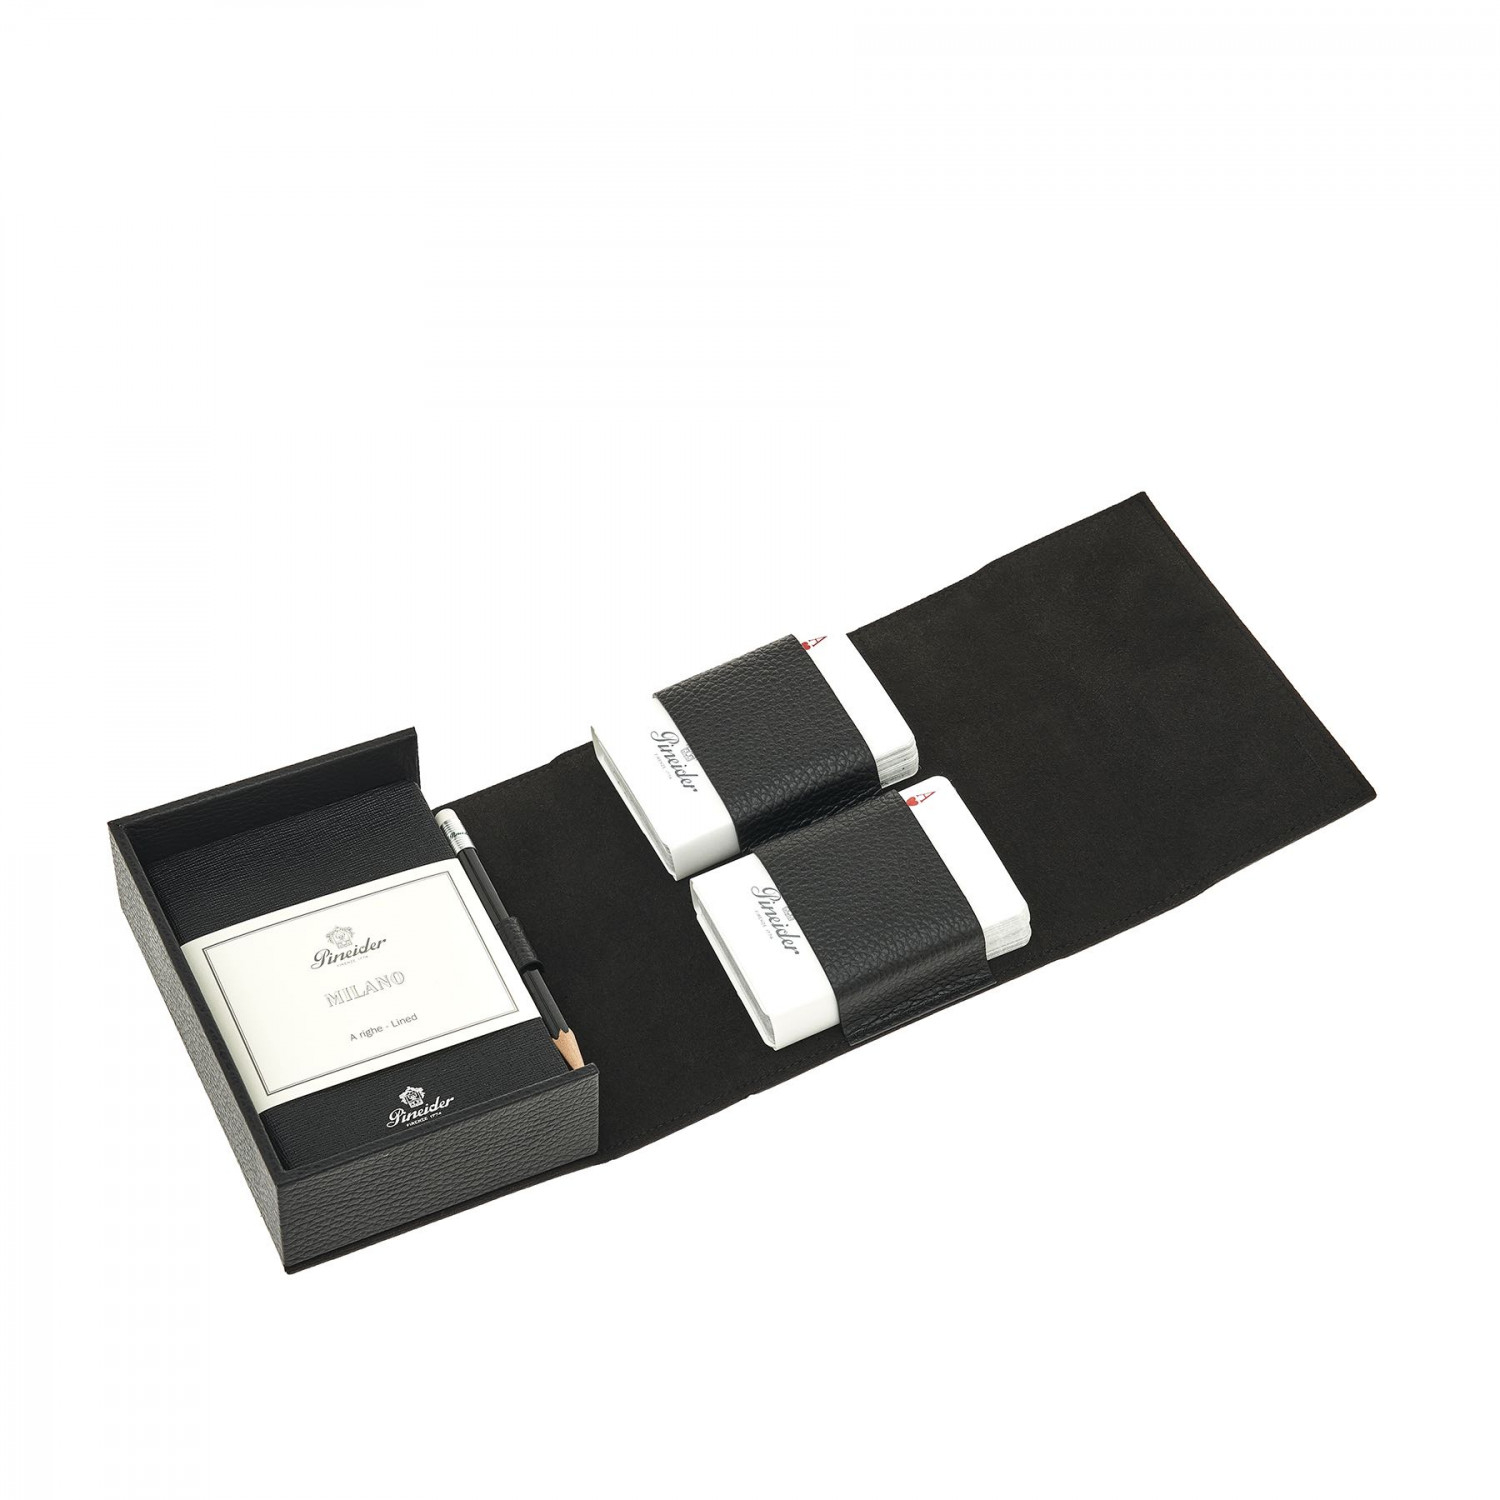 Burraco playing cards set in leather_Small